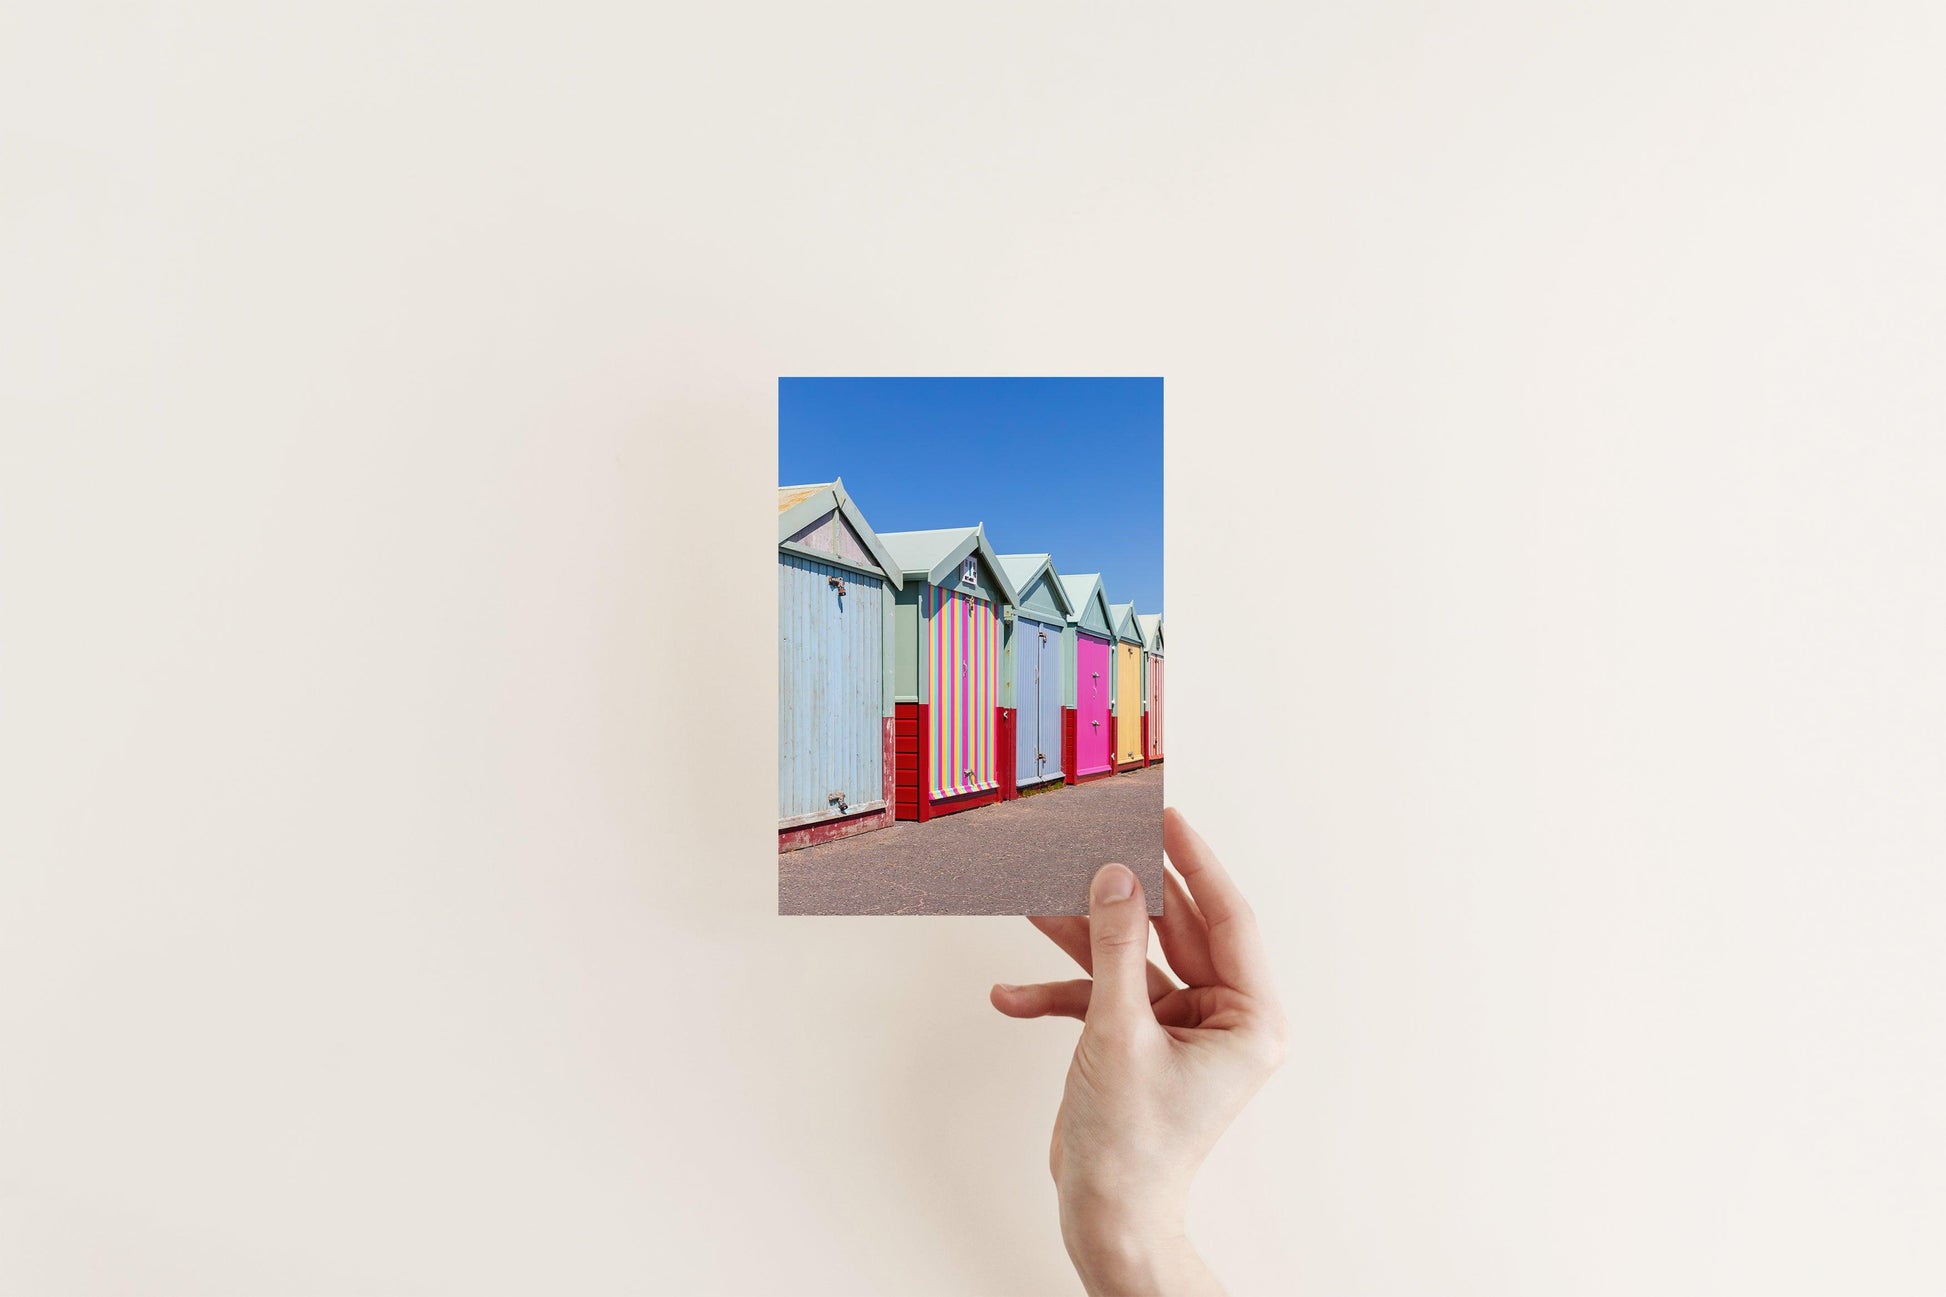 Colorful Beach Huts II | Beach Photography Print - Departures Print Shop